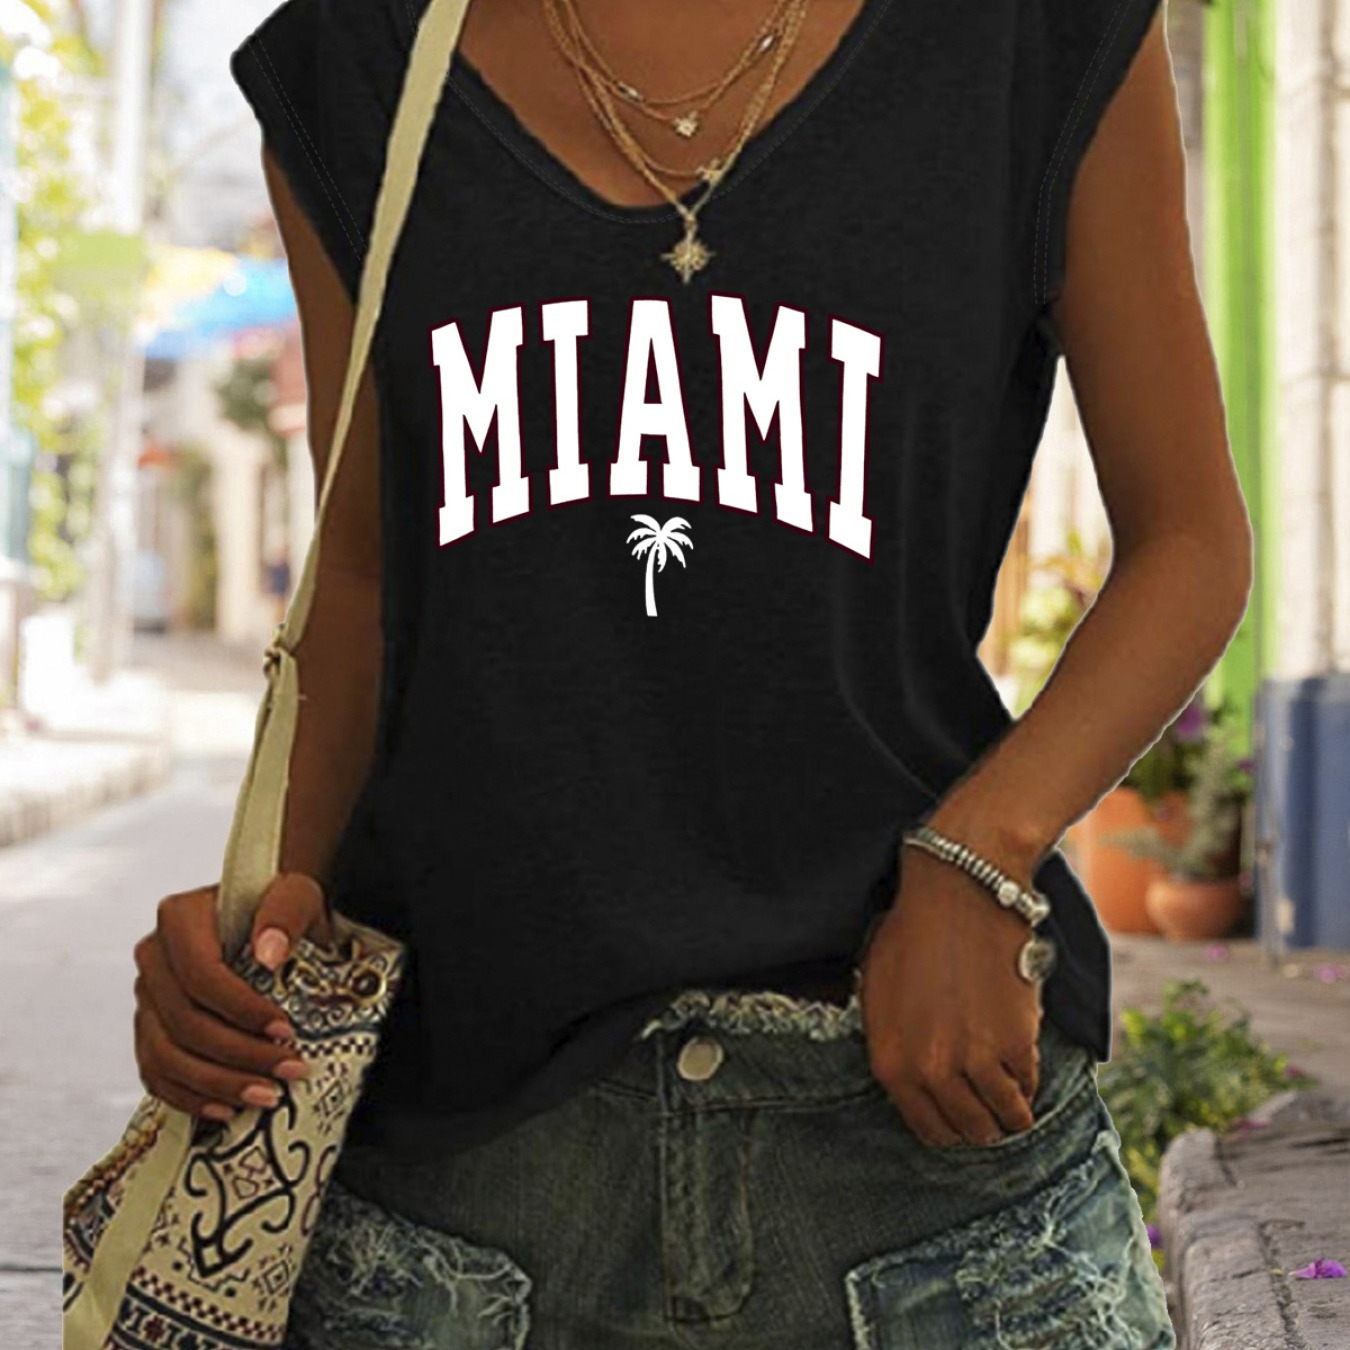 

Miami Letter Print Tank Top, Cap Sleeve Casual Top For Summer & Spring, Women's Clothing